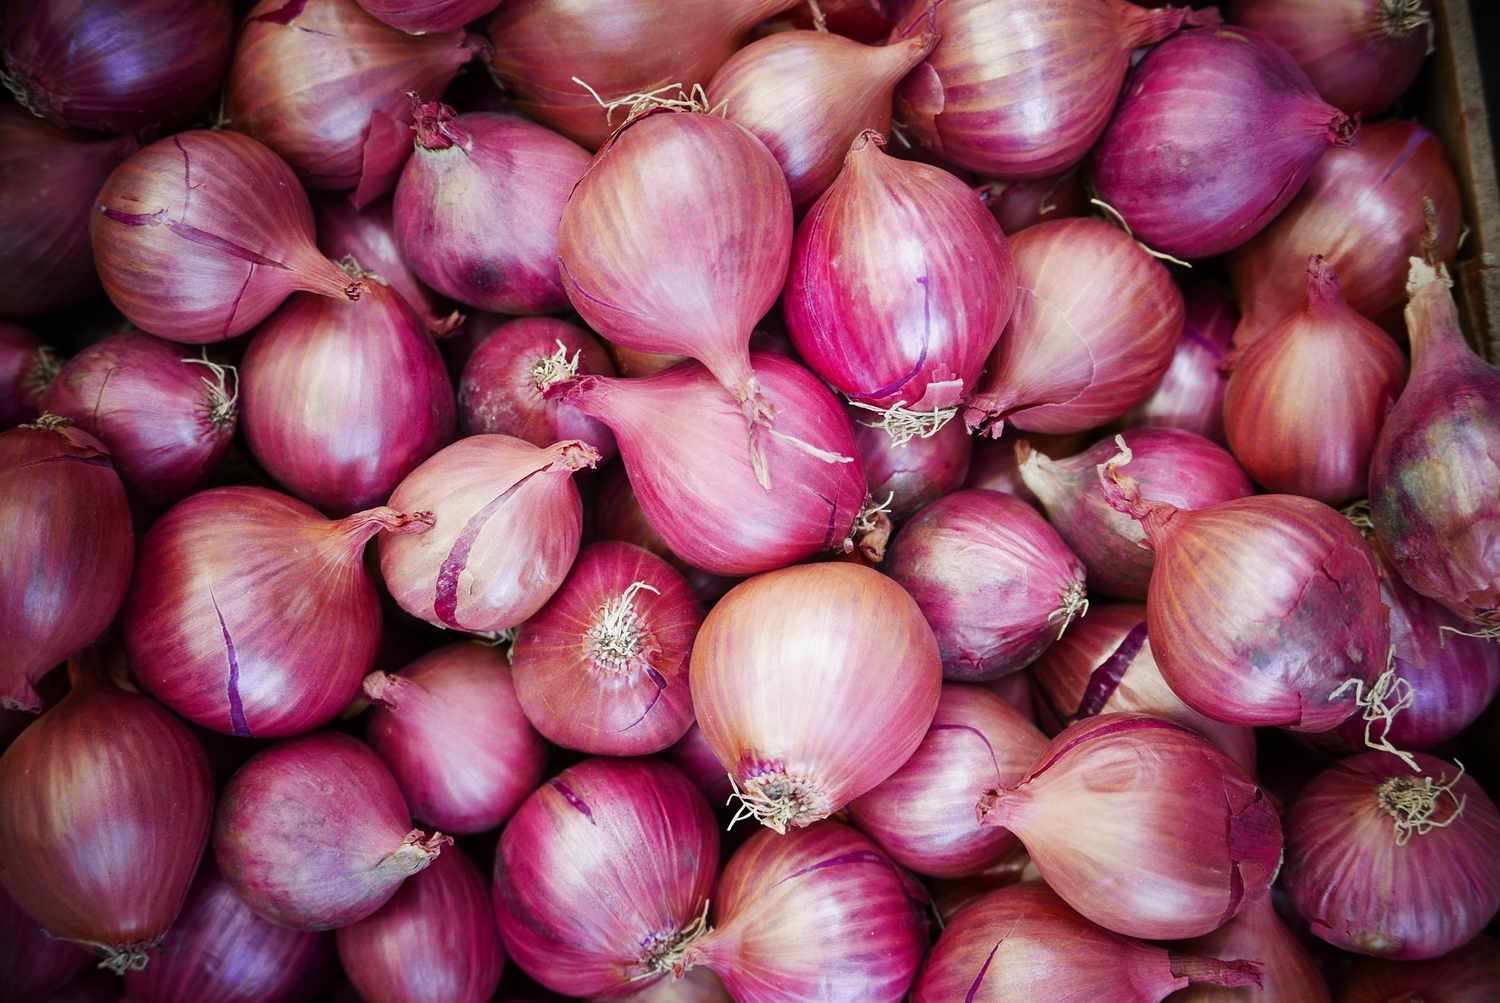 Onion Prices Could Dip Below Rs 40/kg By January, Food Ministry Official Tells Press